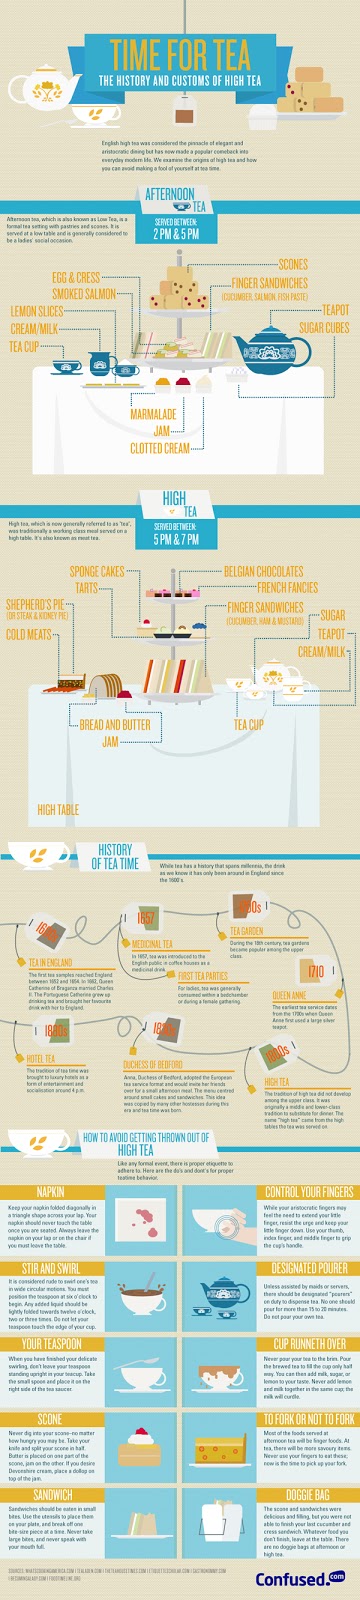 Five Handy Tea Time Infographics with tips on catering, etiquette, serving and hosting - not to mention the history of Afternoon Tea. by Eliza Ellis